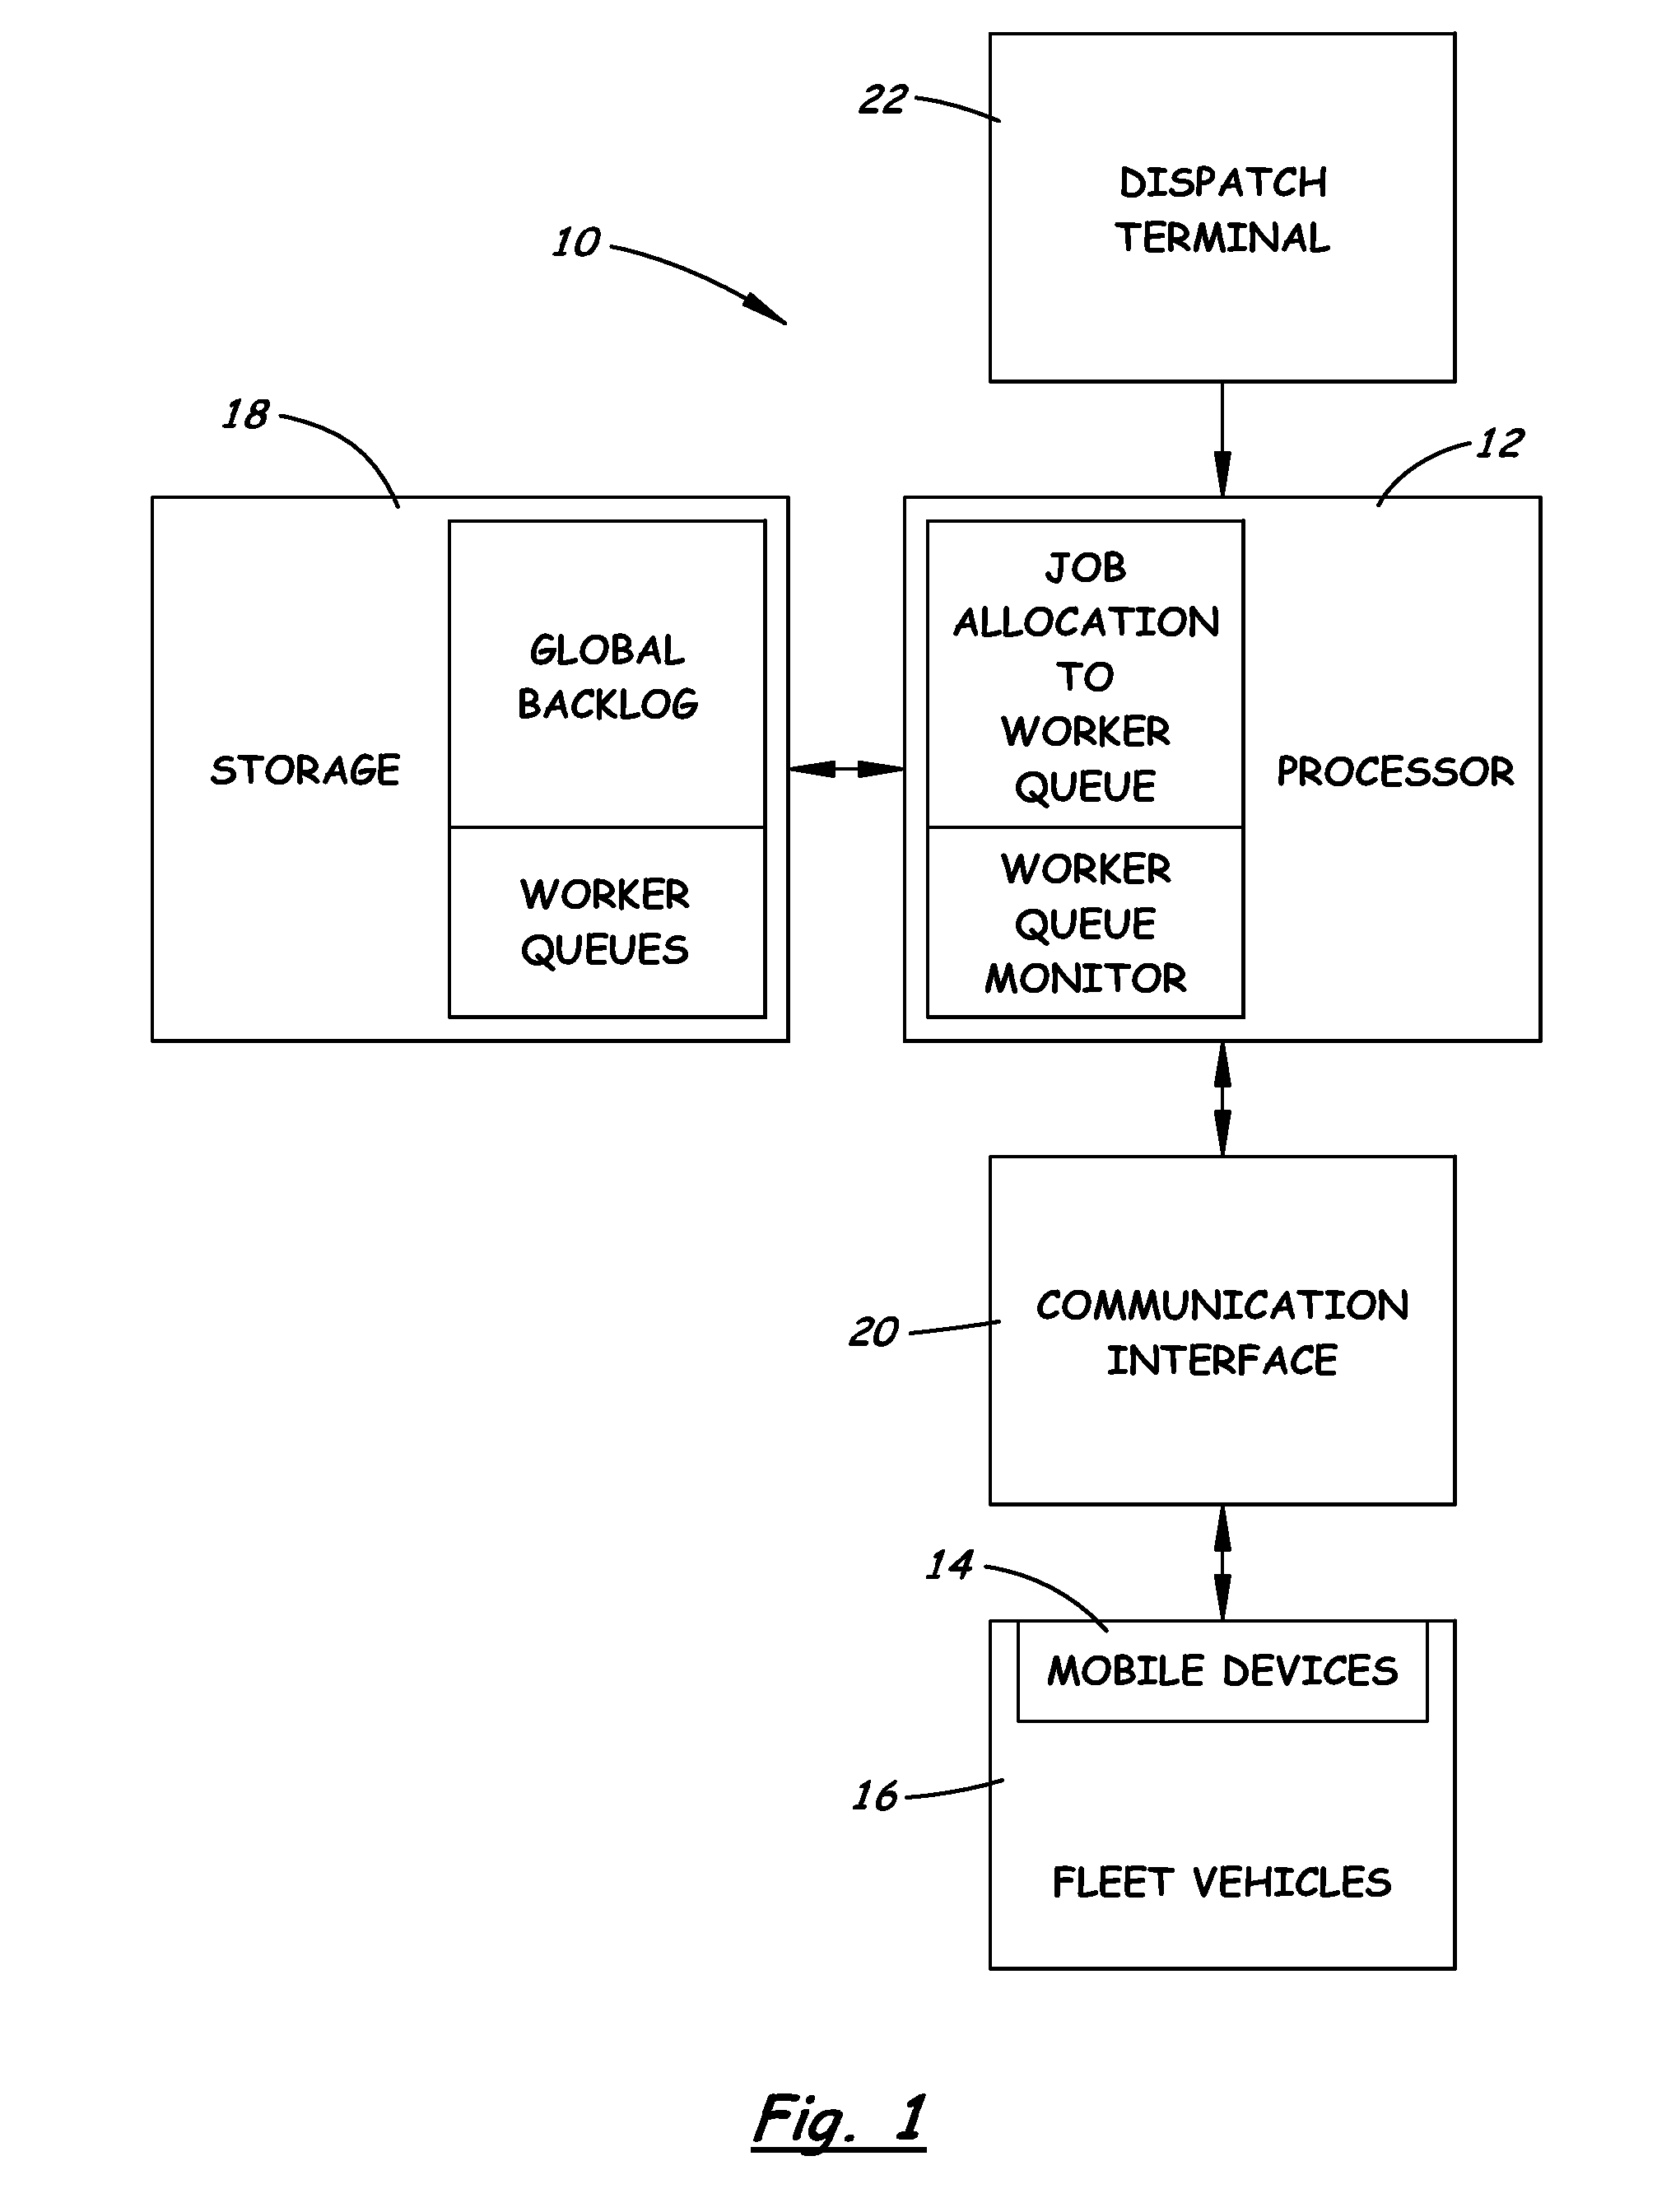 System and Method for Job Management between Mobile Devices